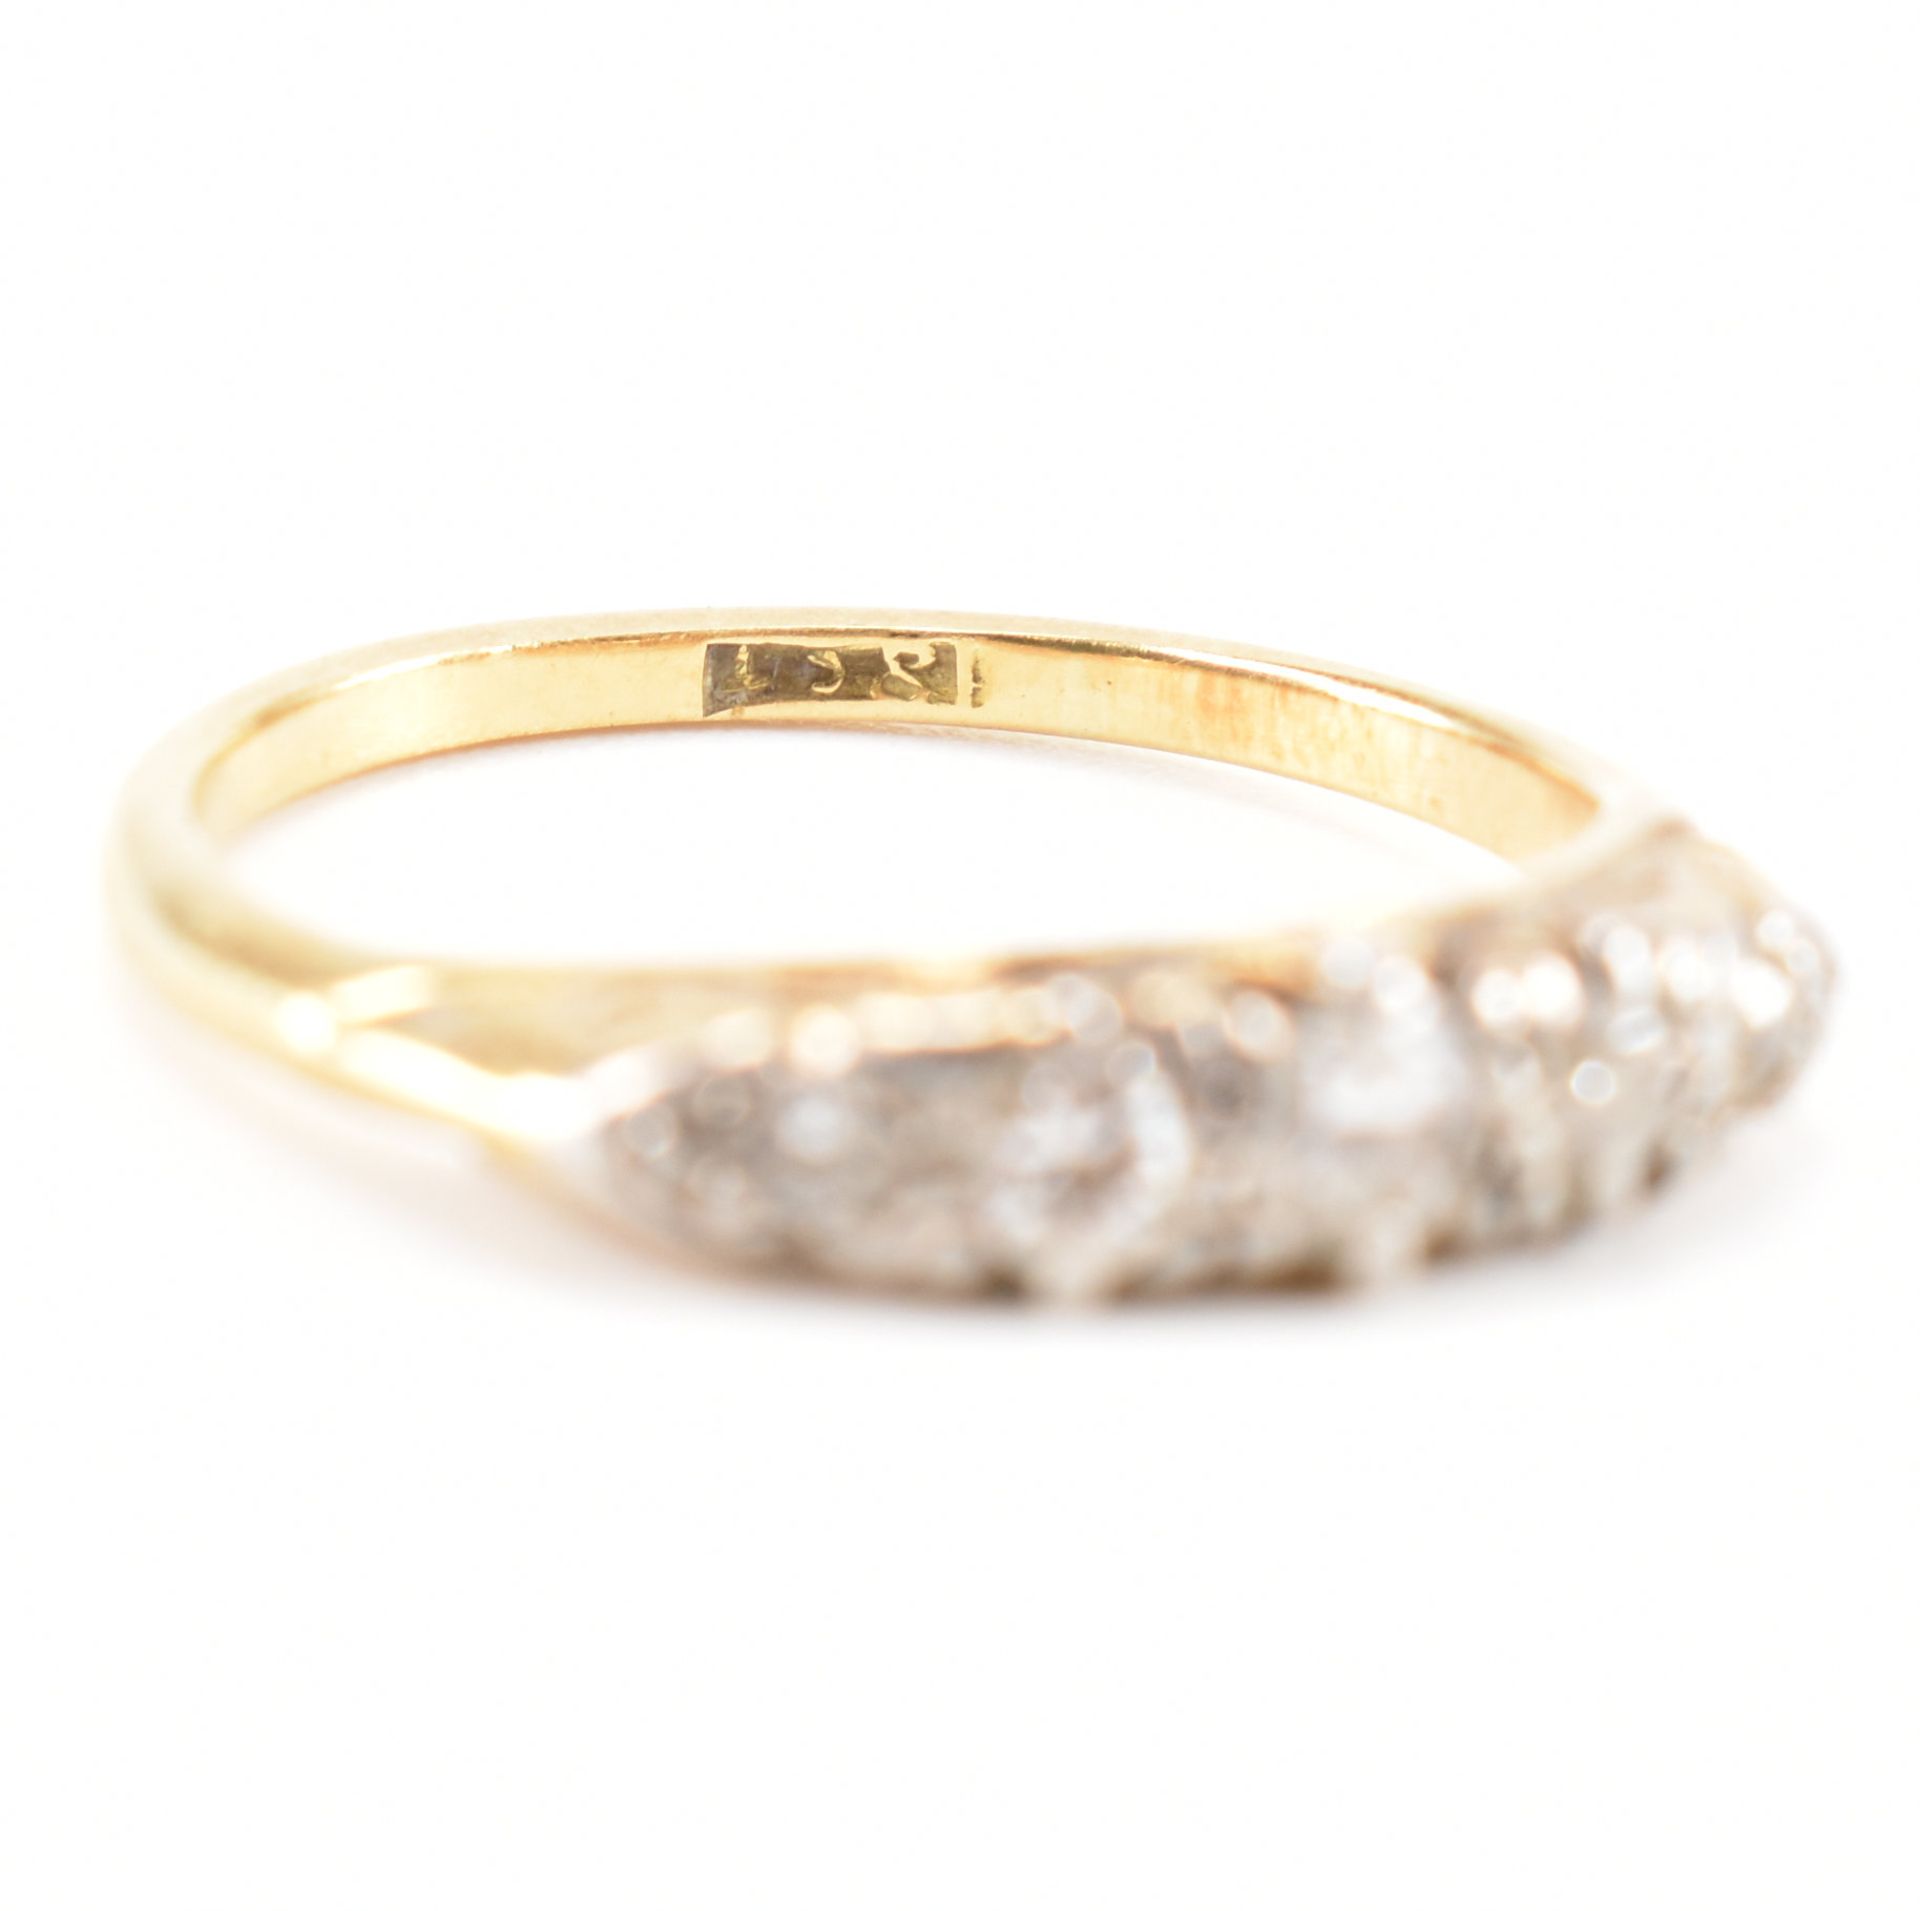 18CT GOLD & DIAMOND FIVE STONE RING - Image 6 of 12